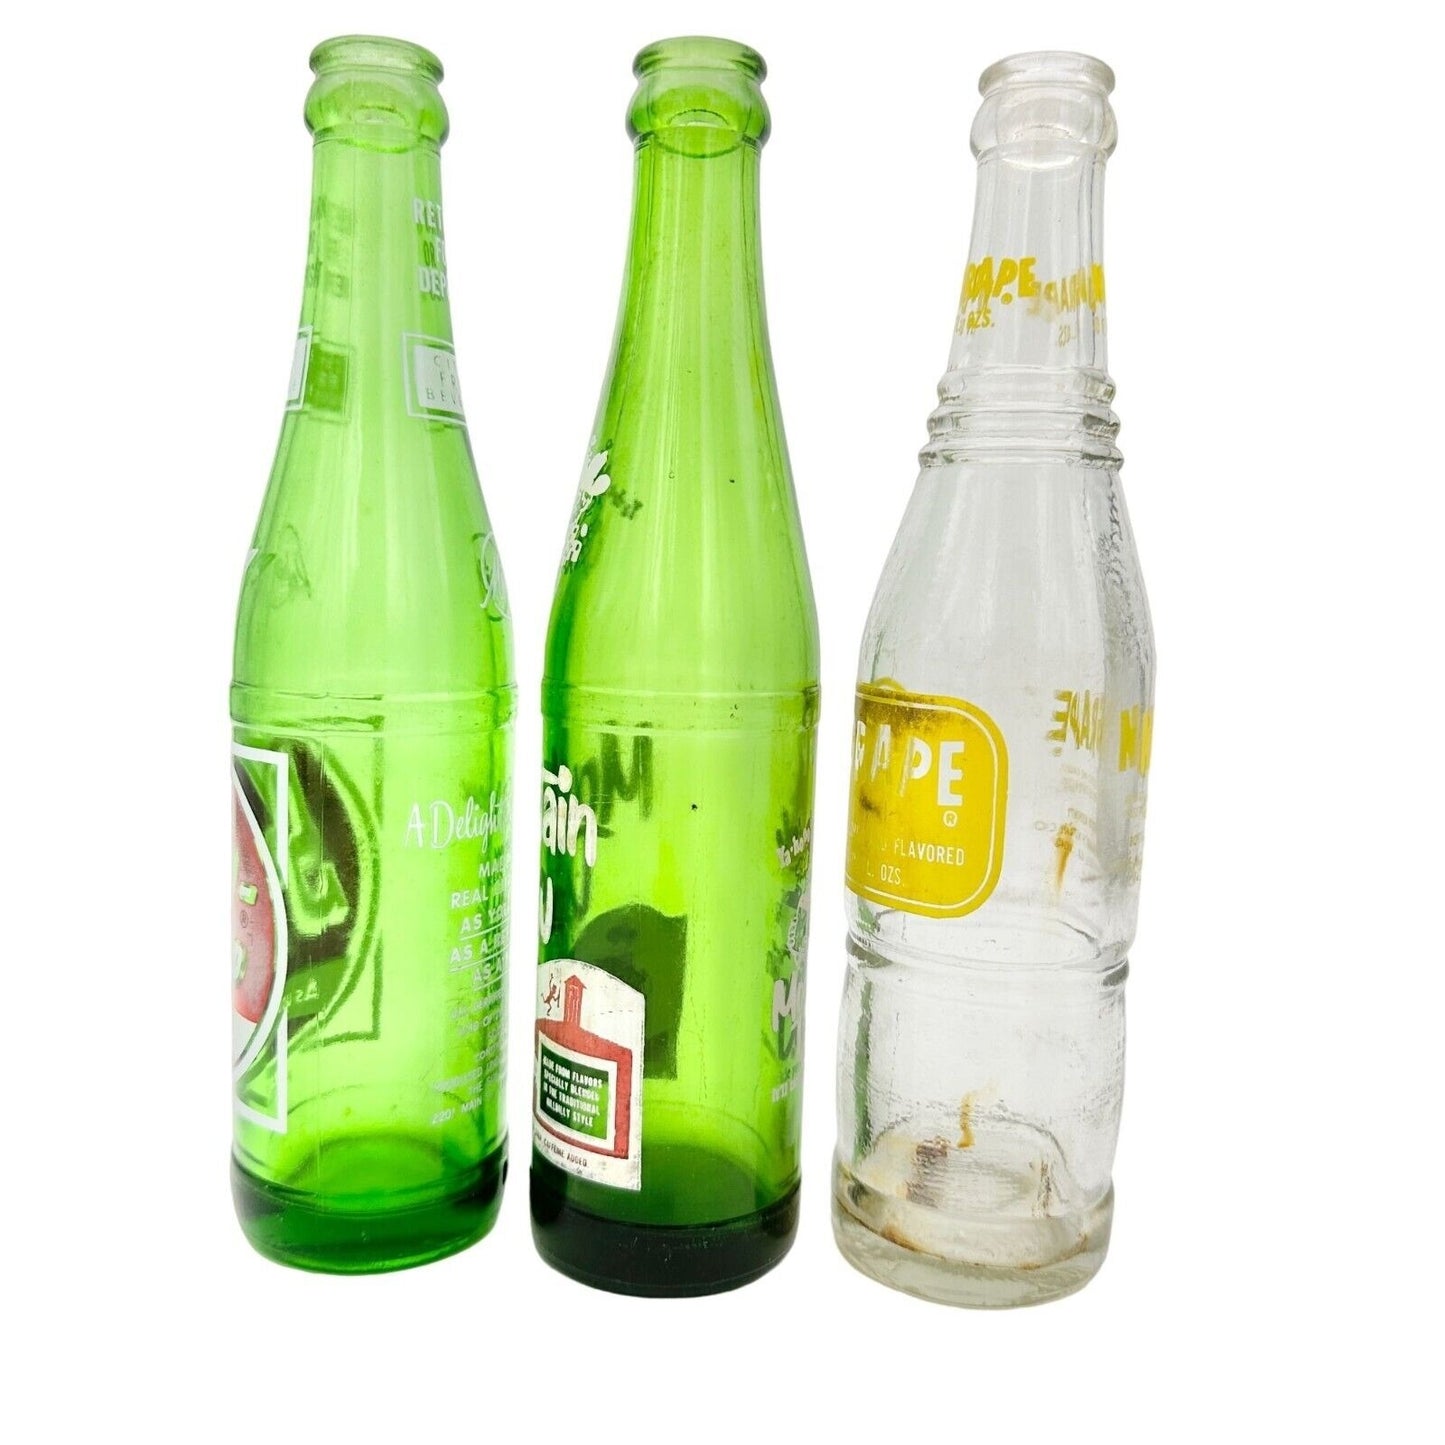 Glass soda pop bottles meant money back in the day - The Mountain